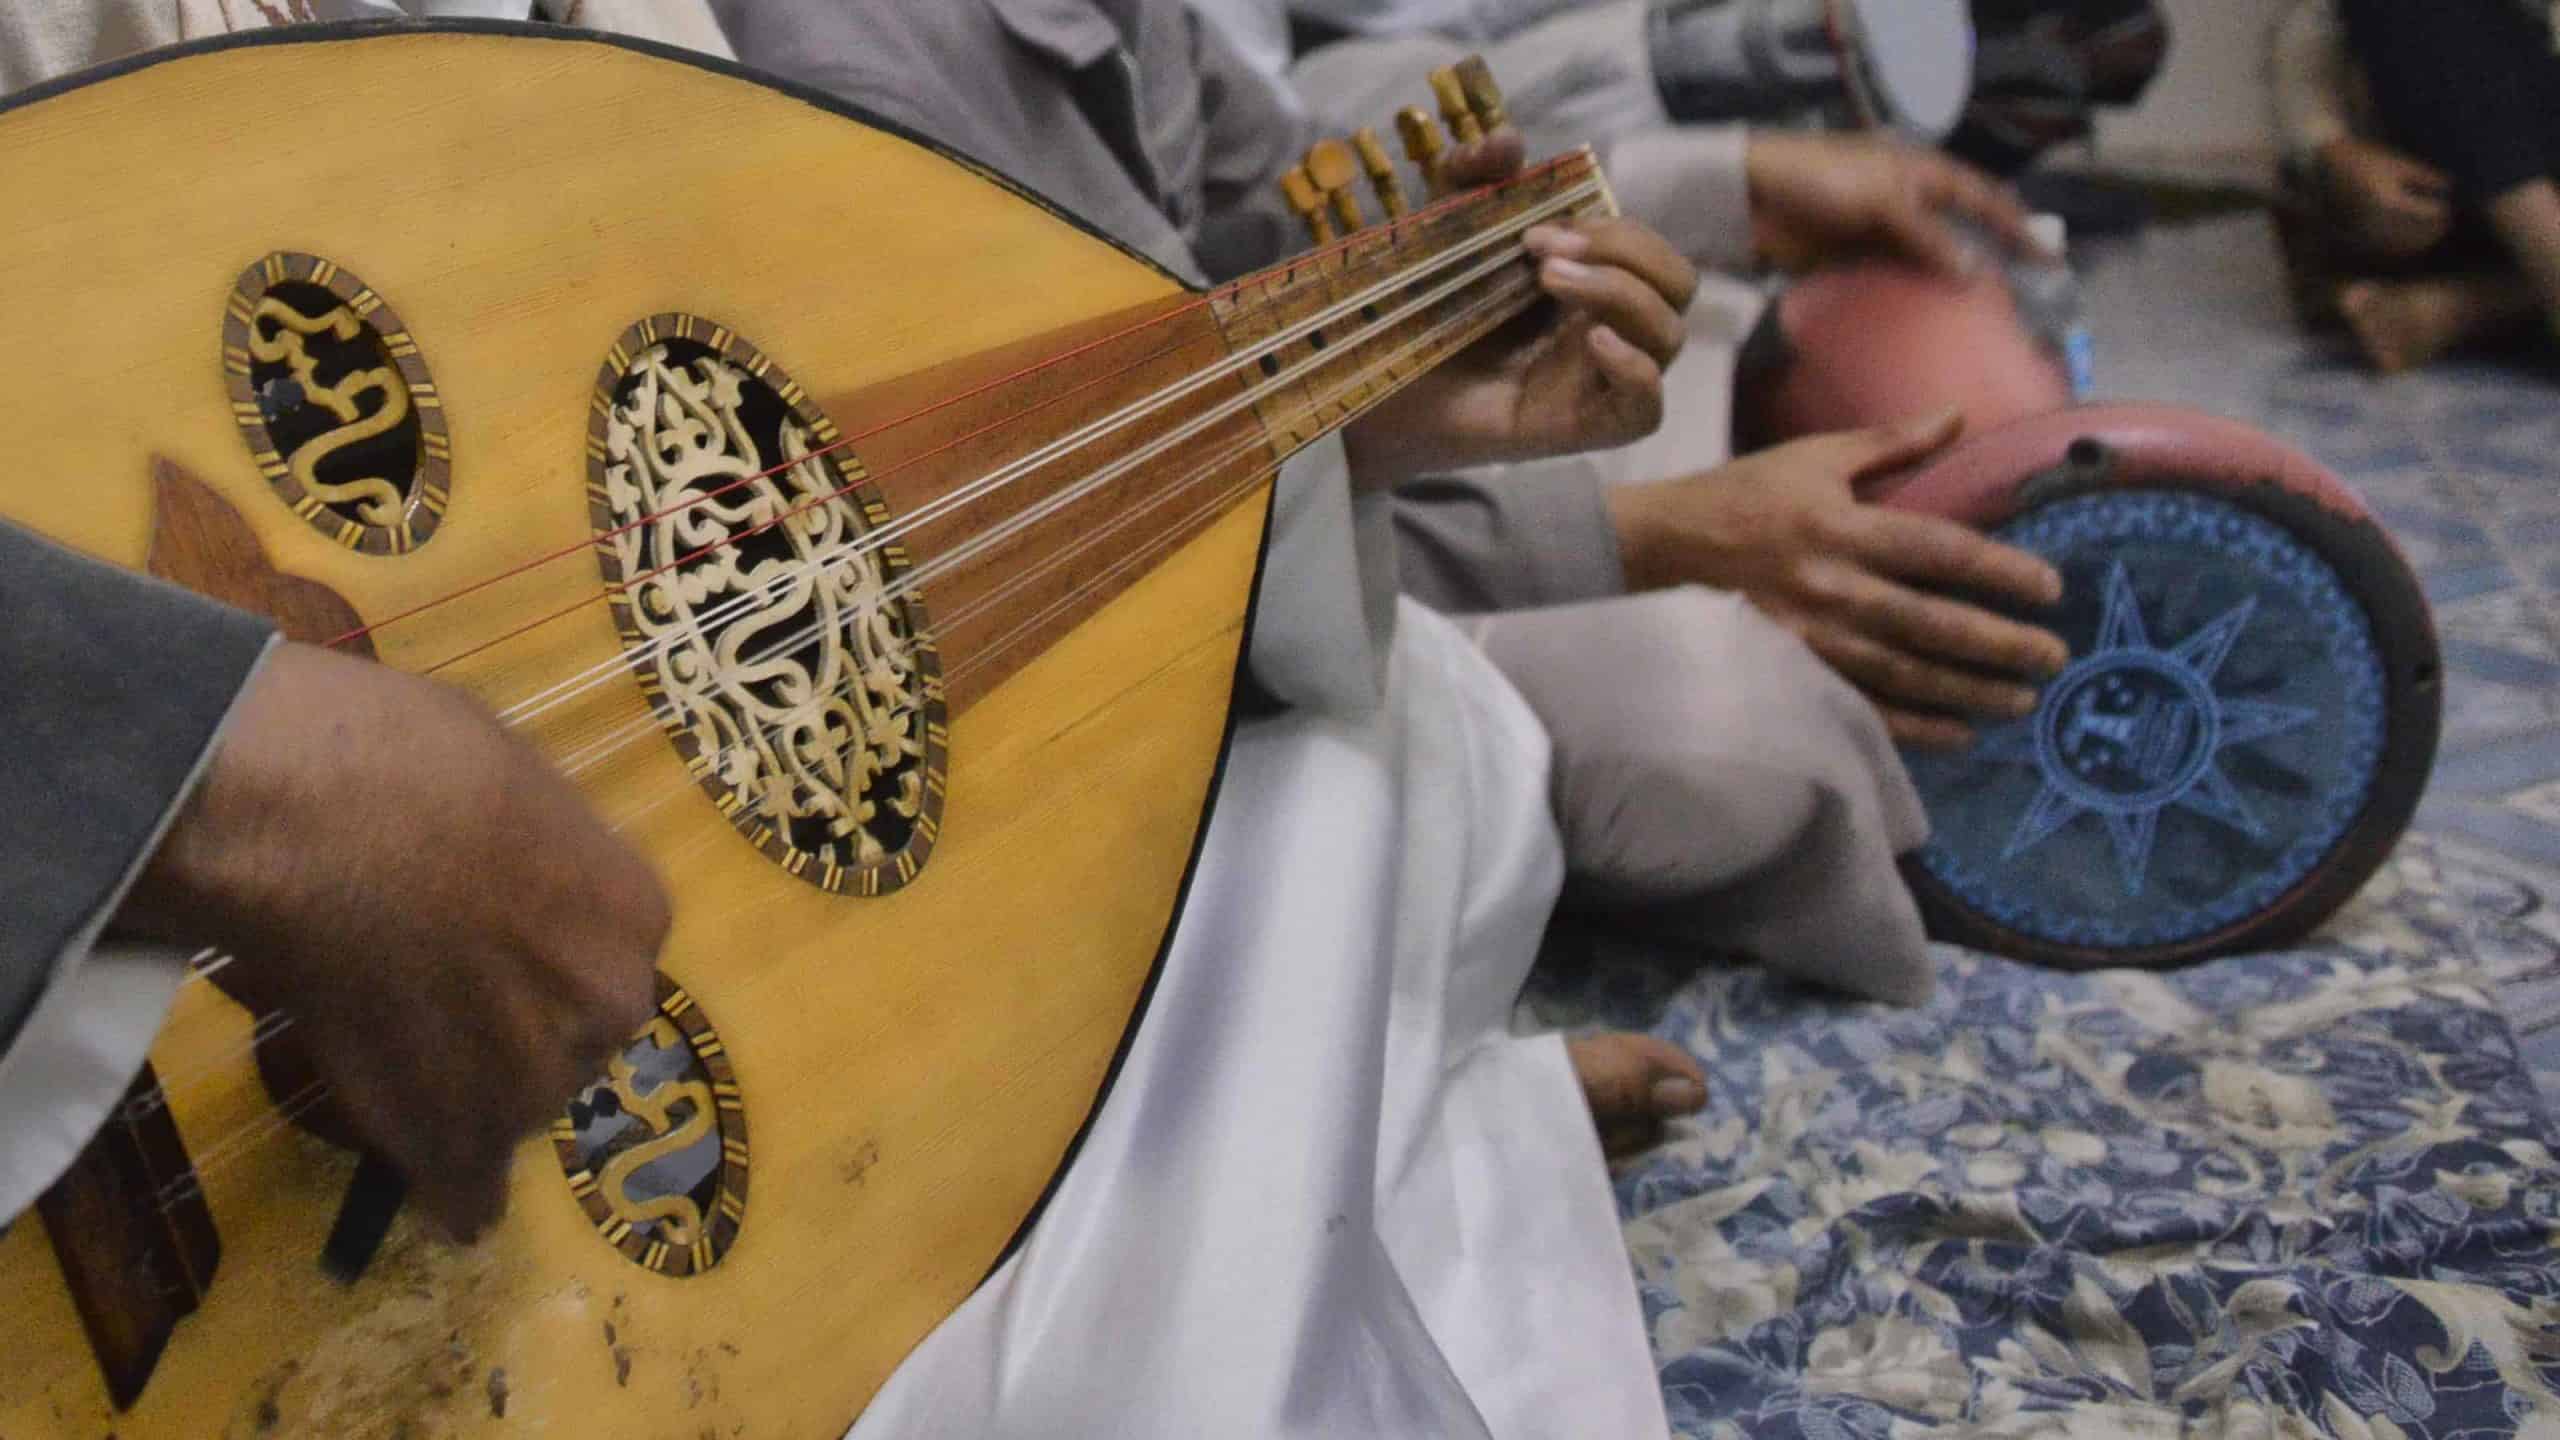 A musician in Yemen plays an Oud, an Arab stringed instrument, in an ensemble. Creative Commons courtesy photo